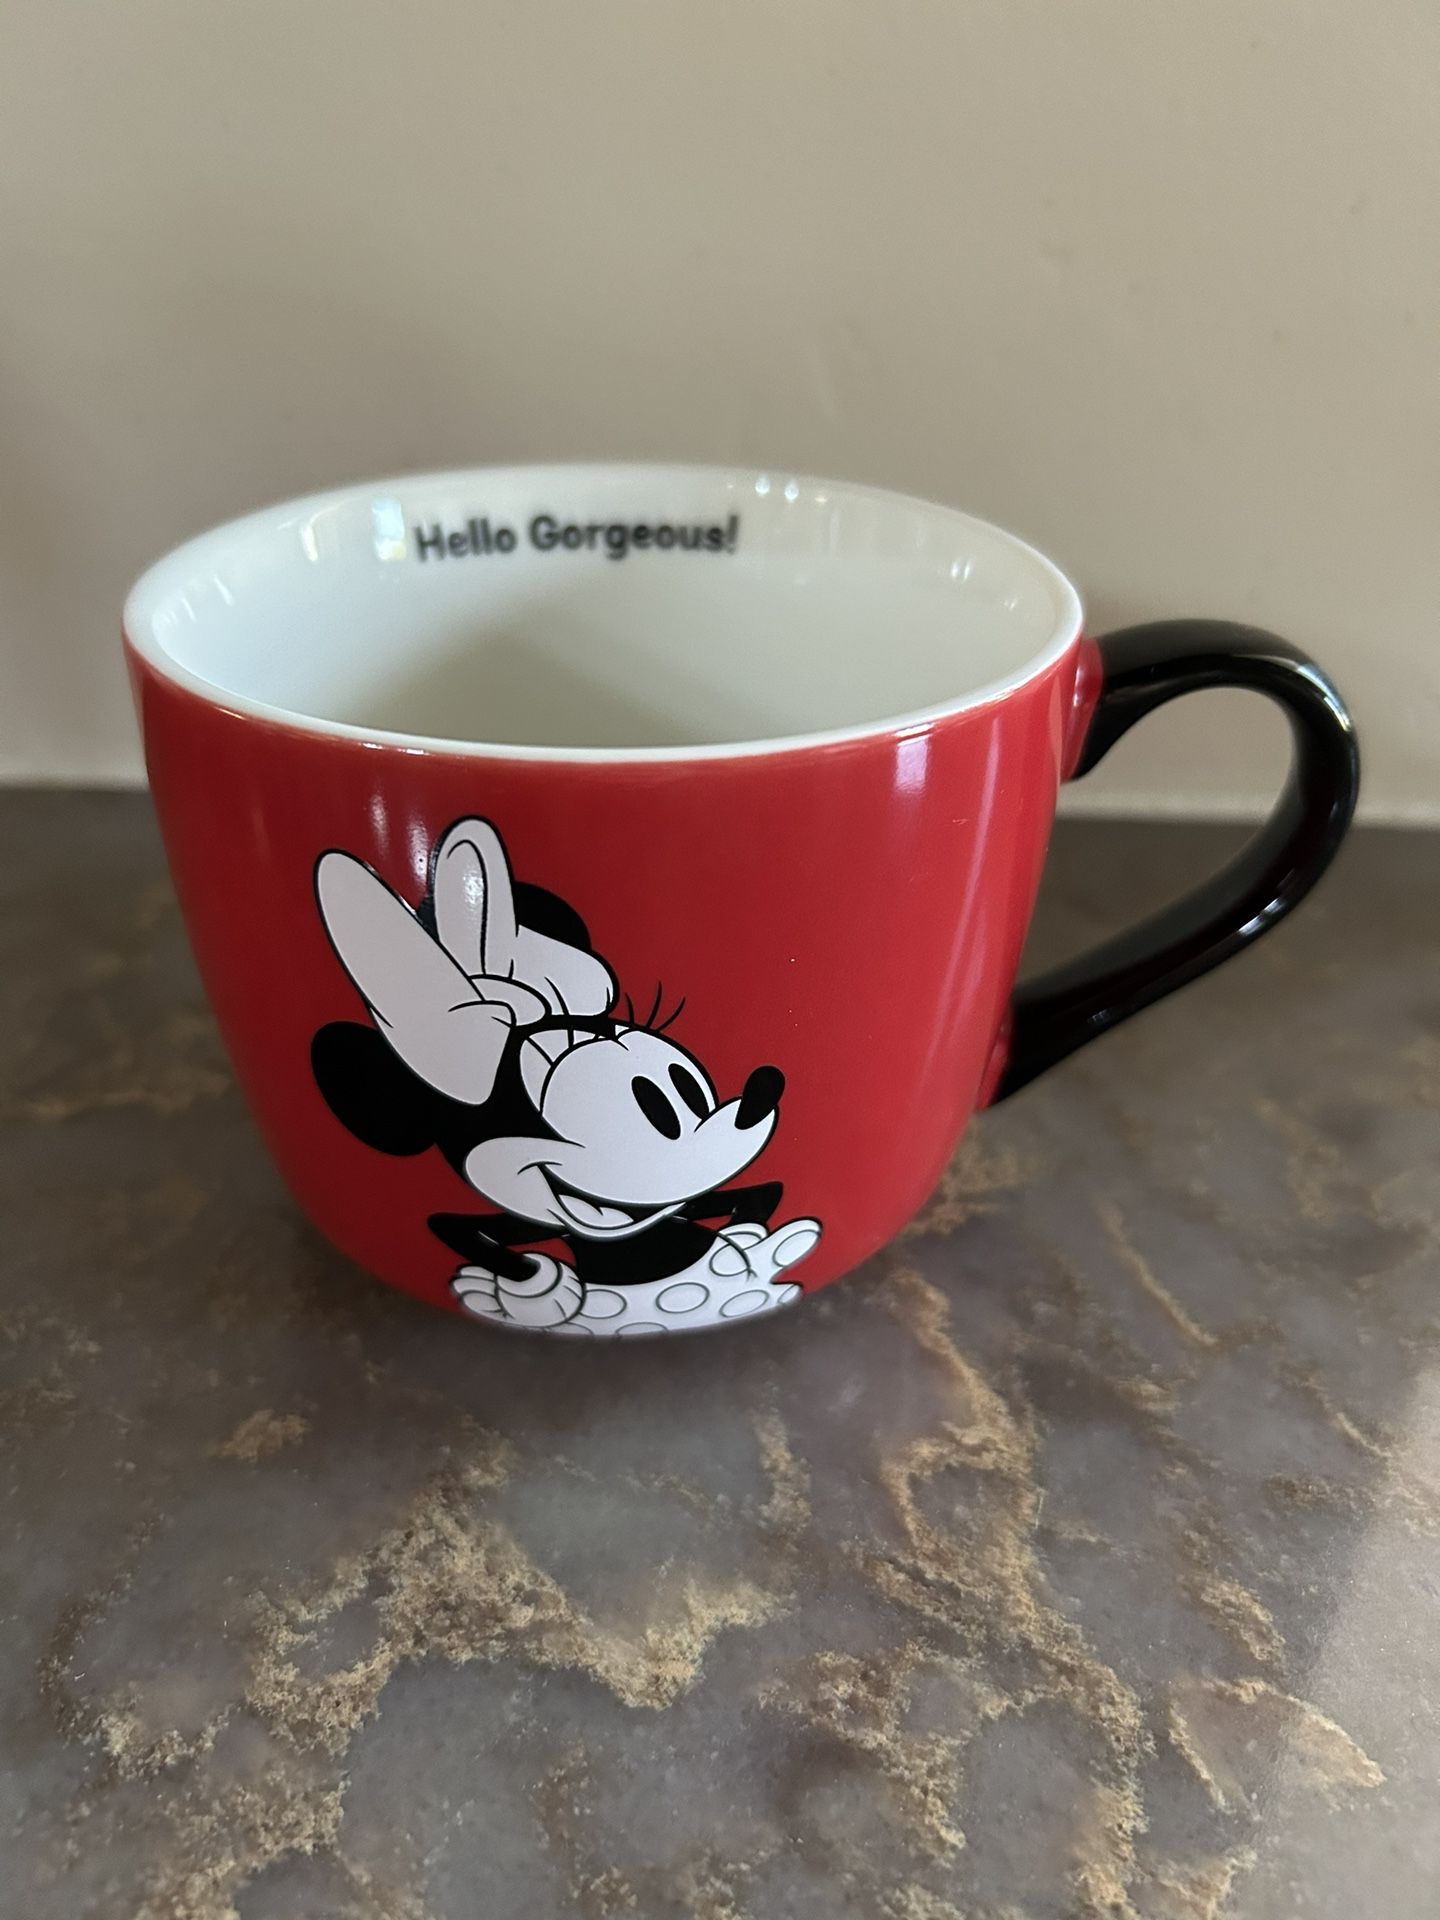 Brand New Collectible Disney Minnie Mouse Mug.  Reads “Hello Gorgeous!” On The Inside. 